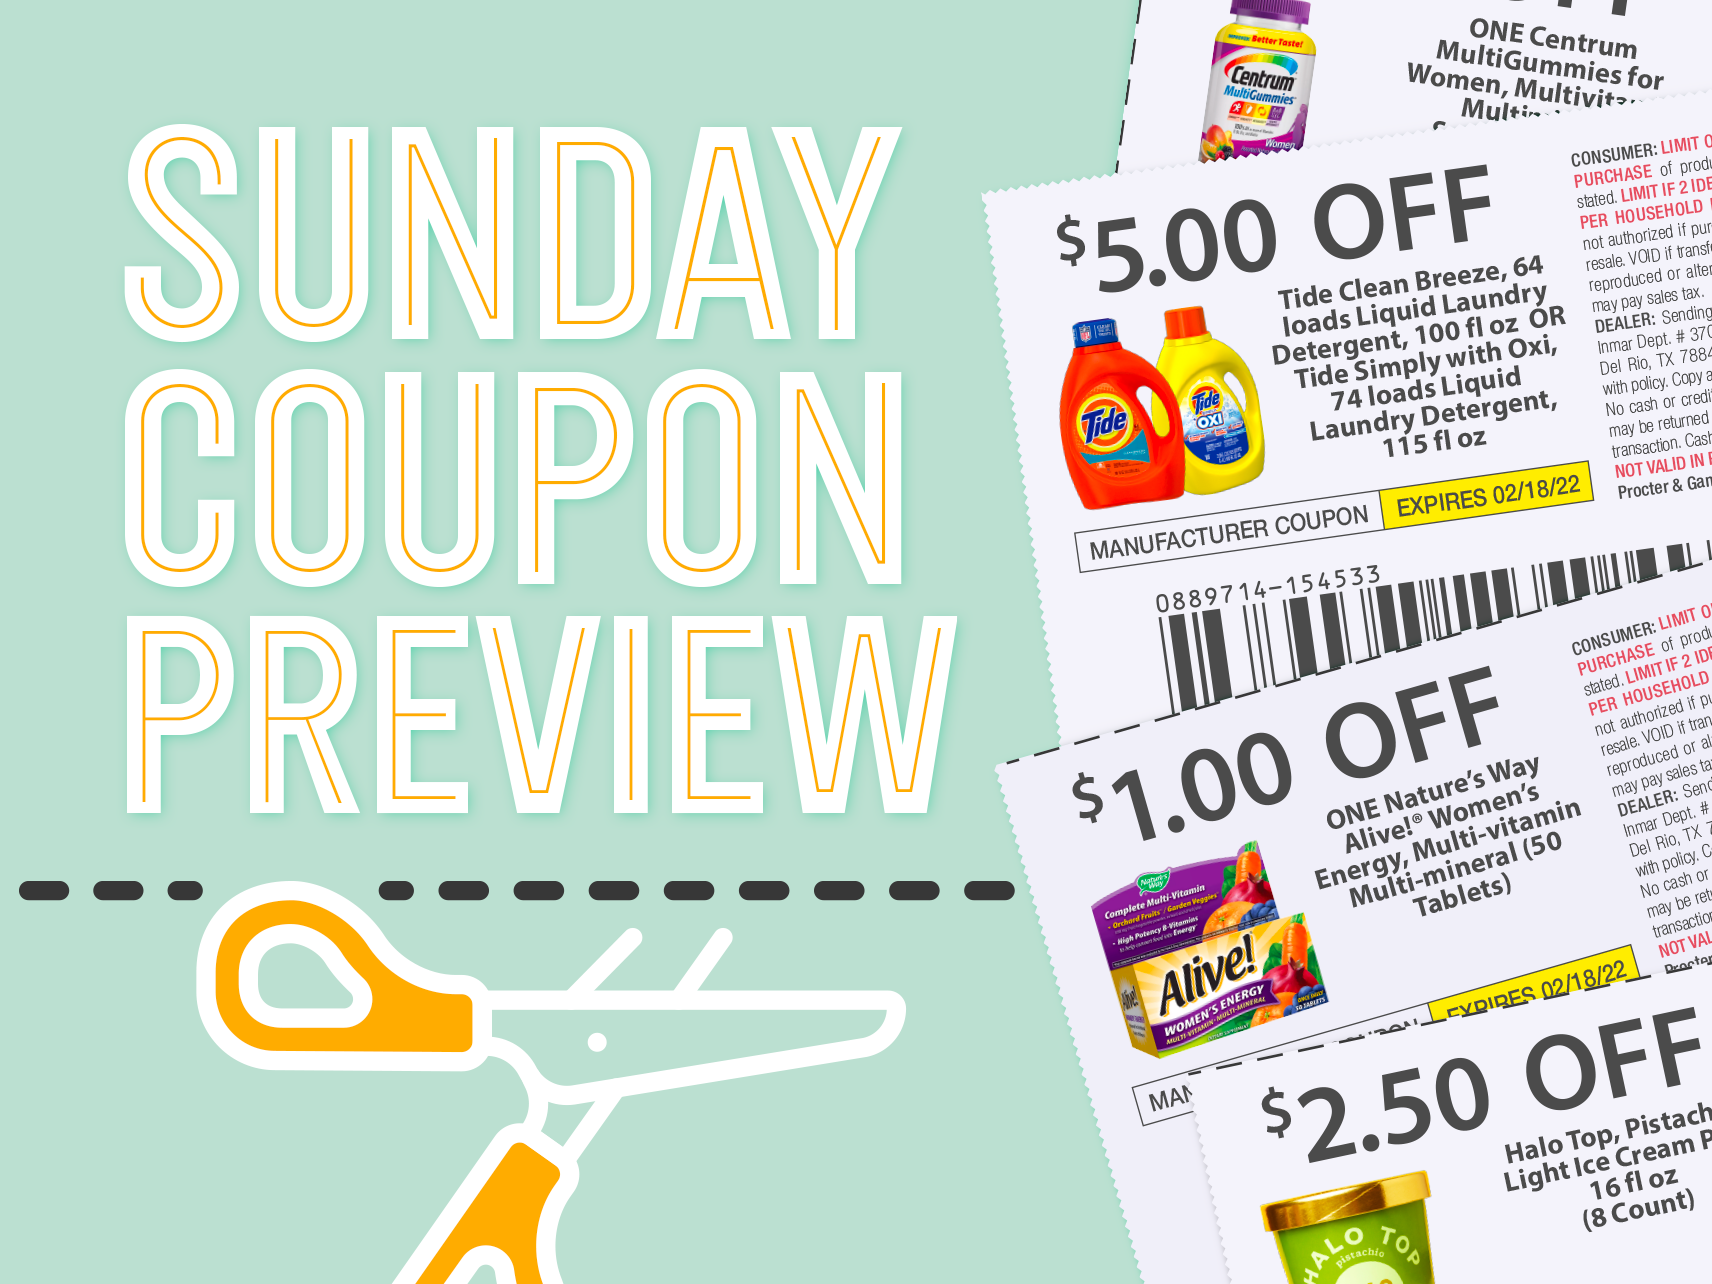 Sunday Coupon Preview For 8/21 – Two Inserts